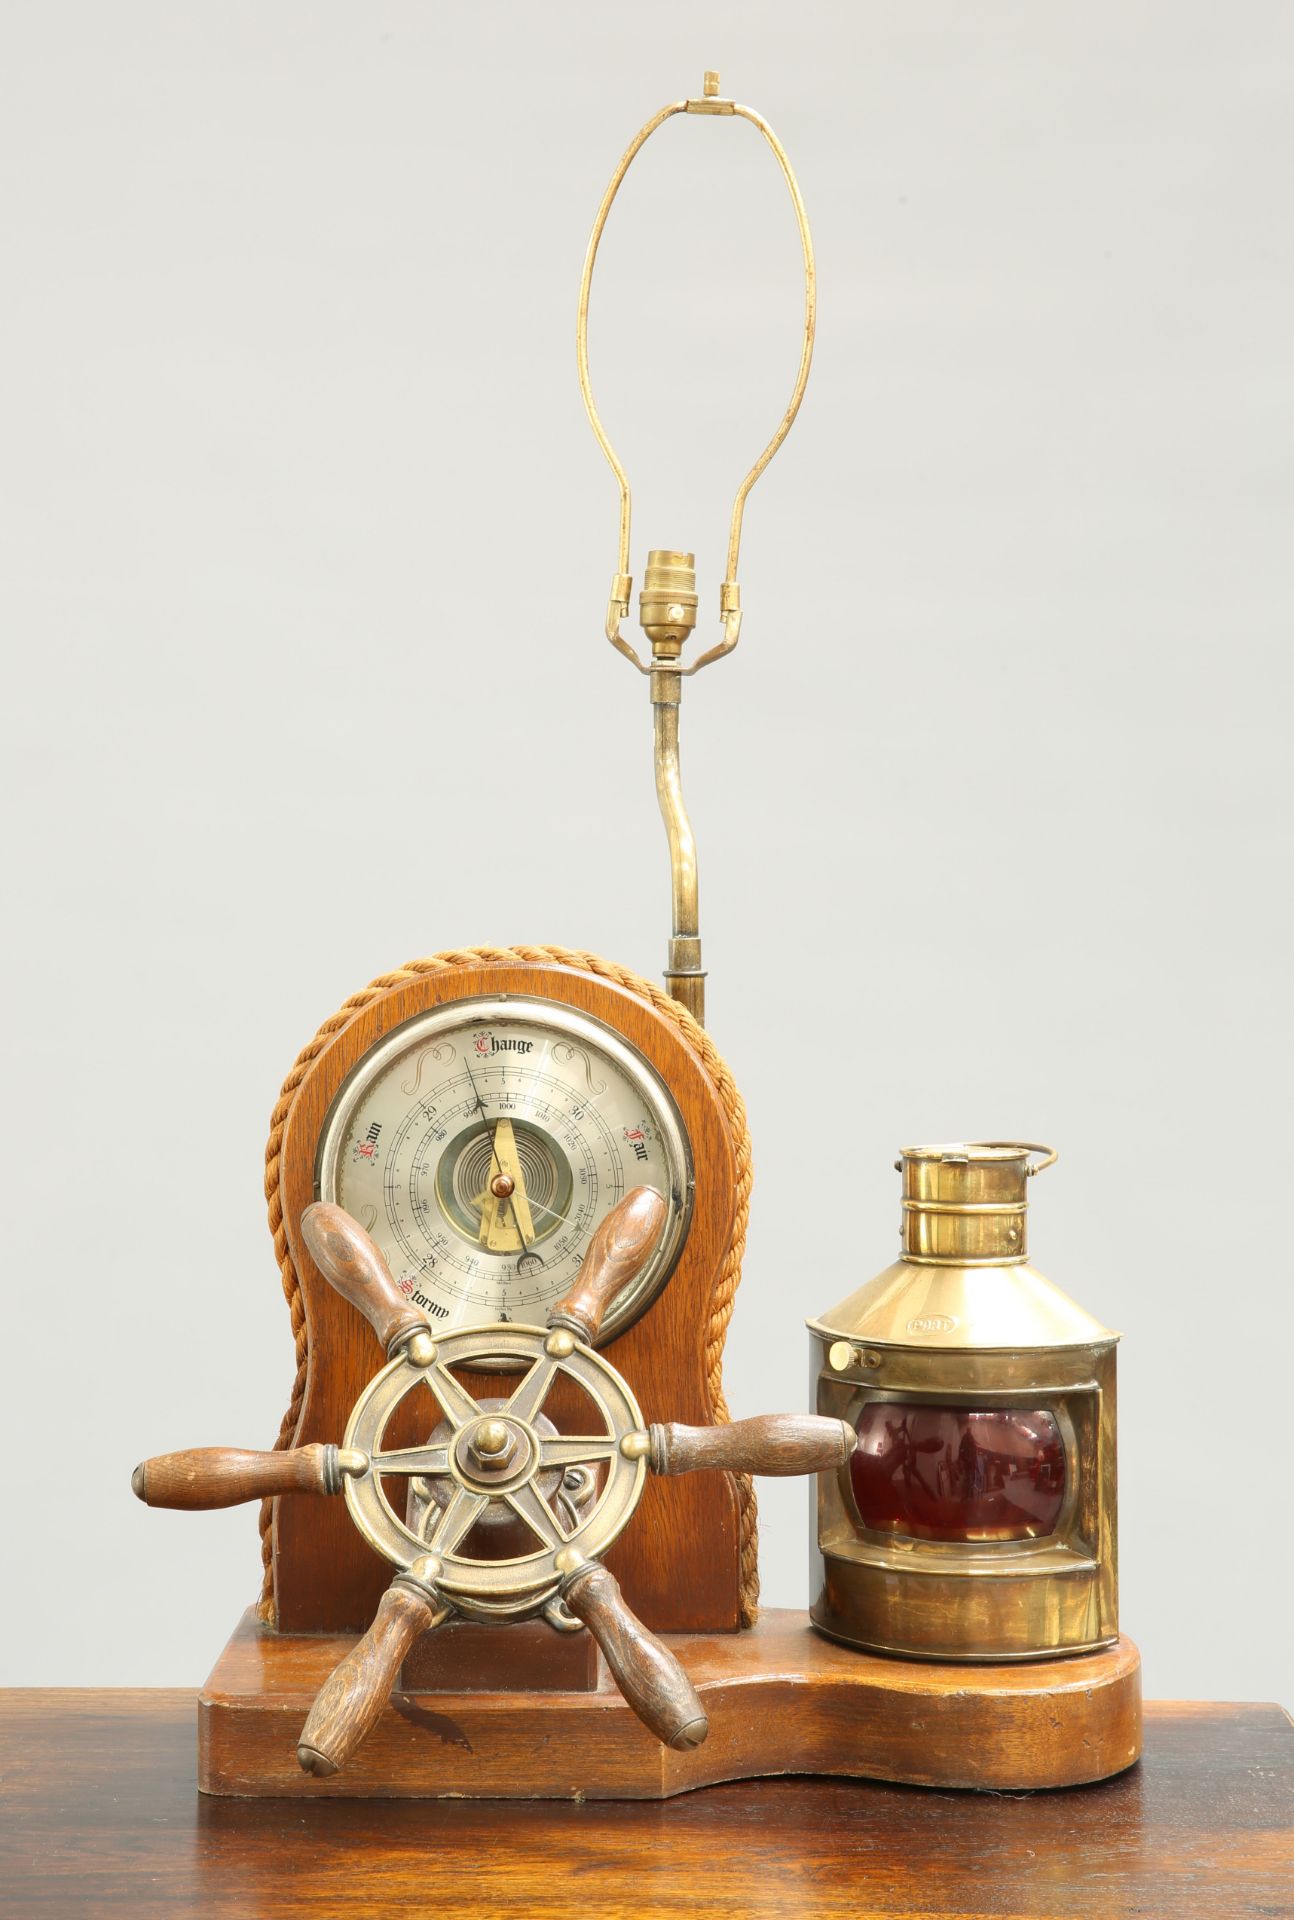 A BRASS-MOUNTED LAMP AND BAROMETER SET OF NAUTICAL INTEREST